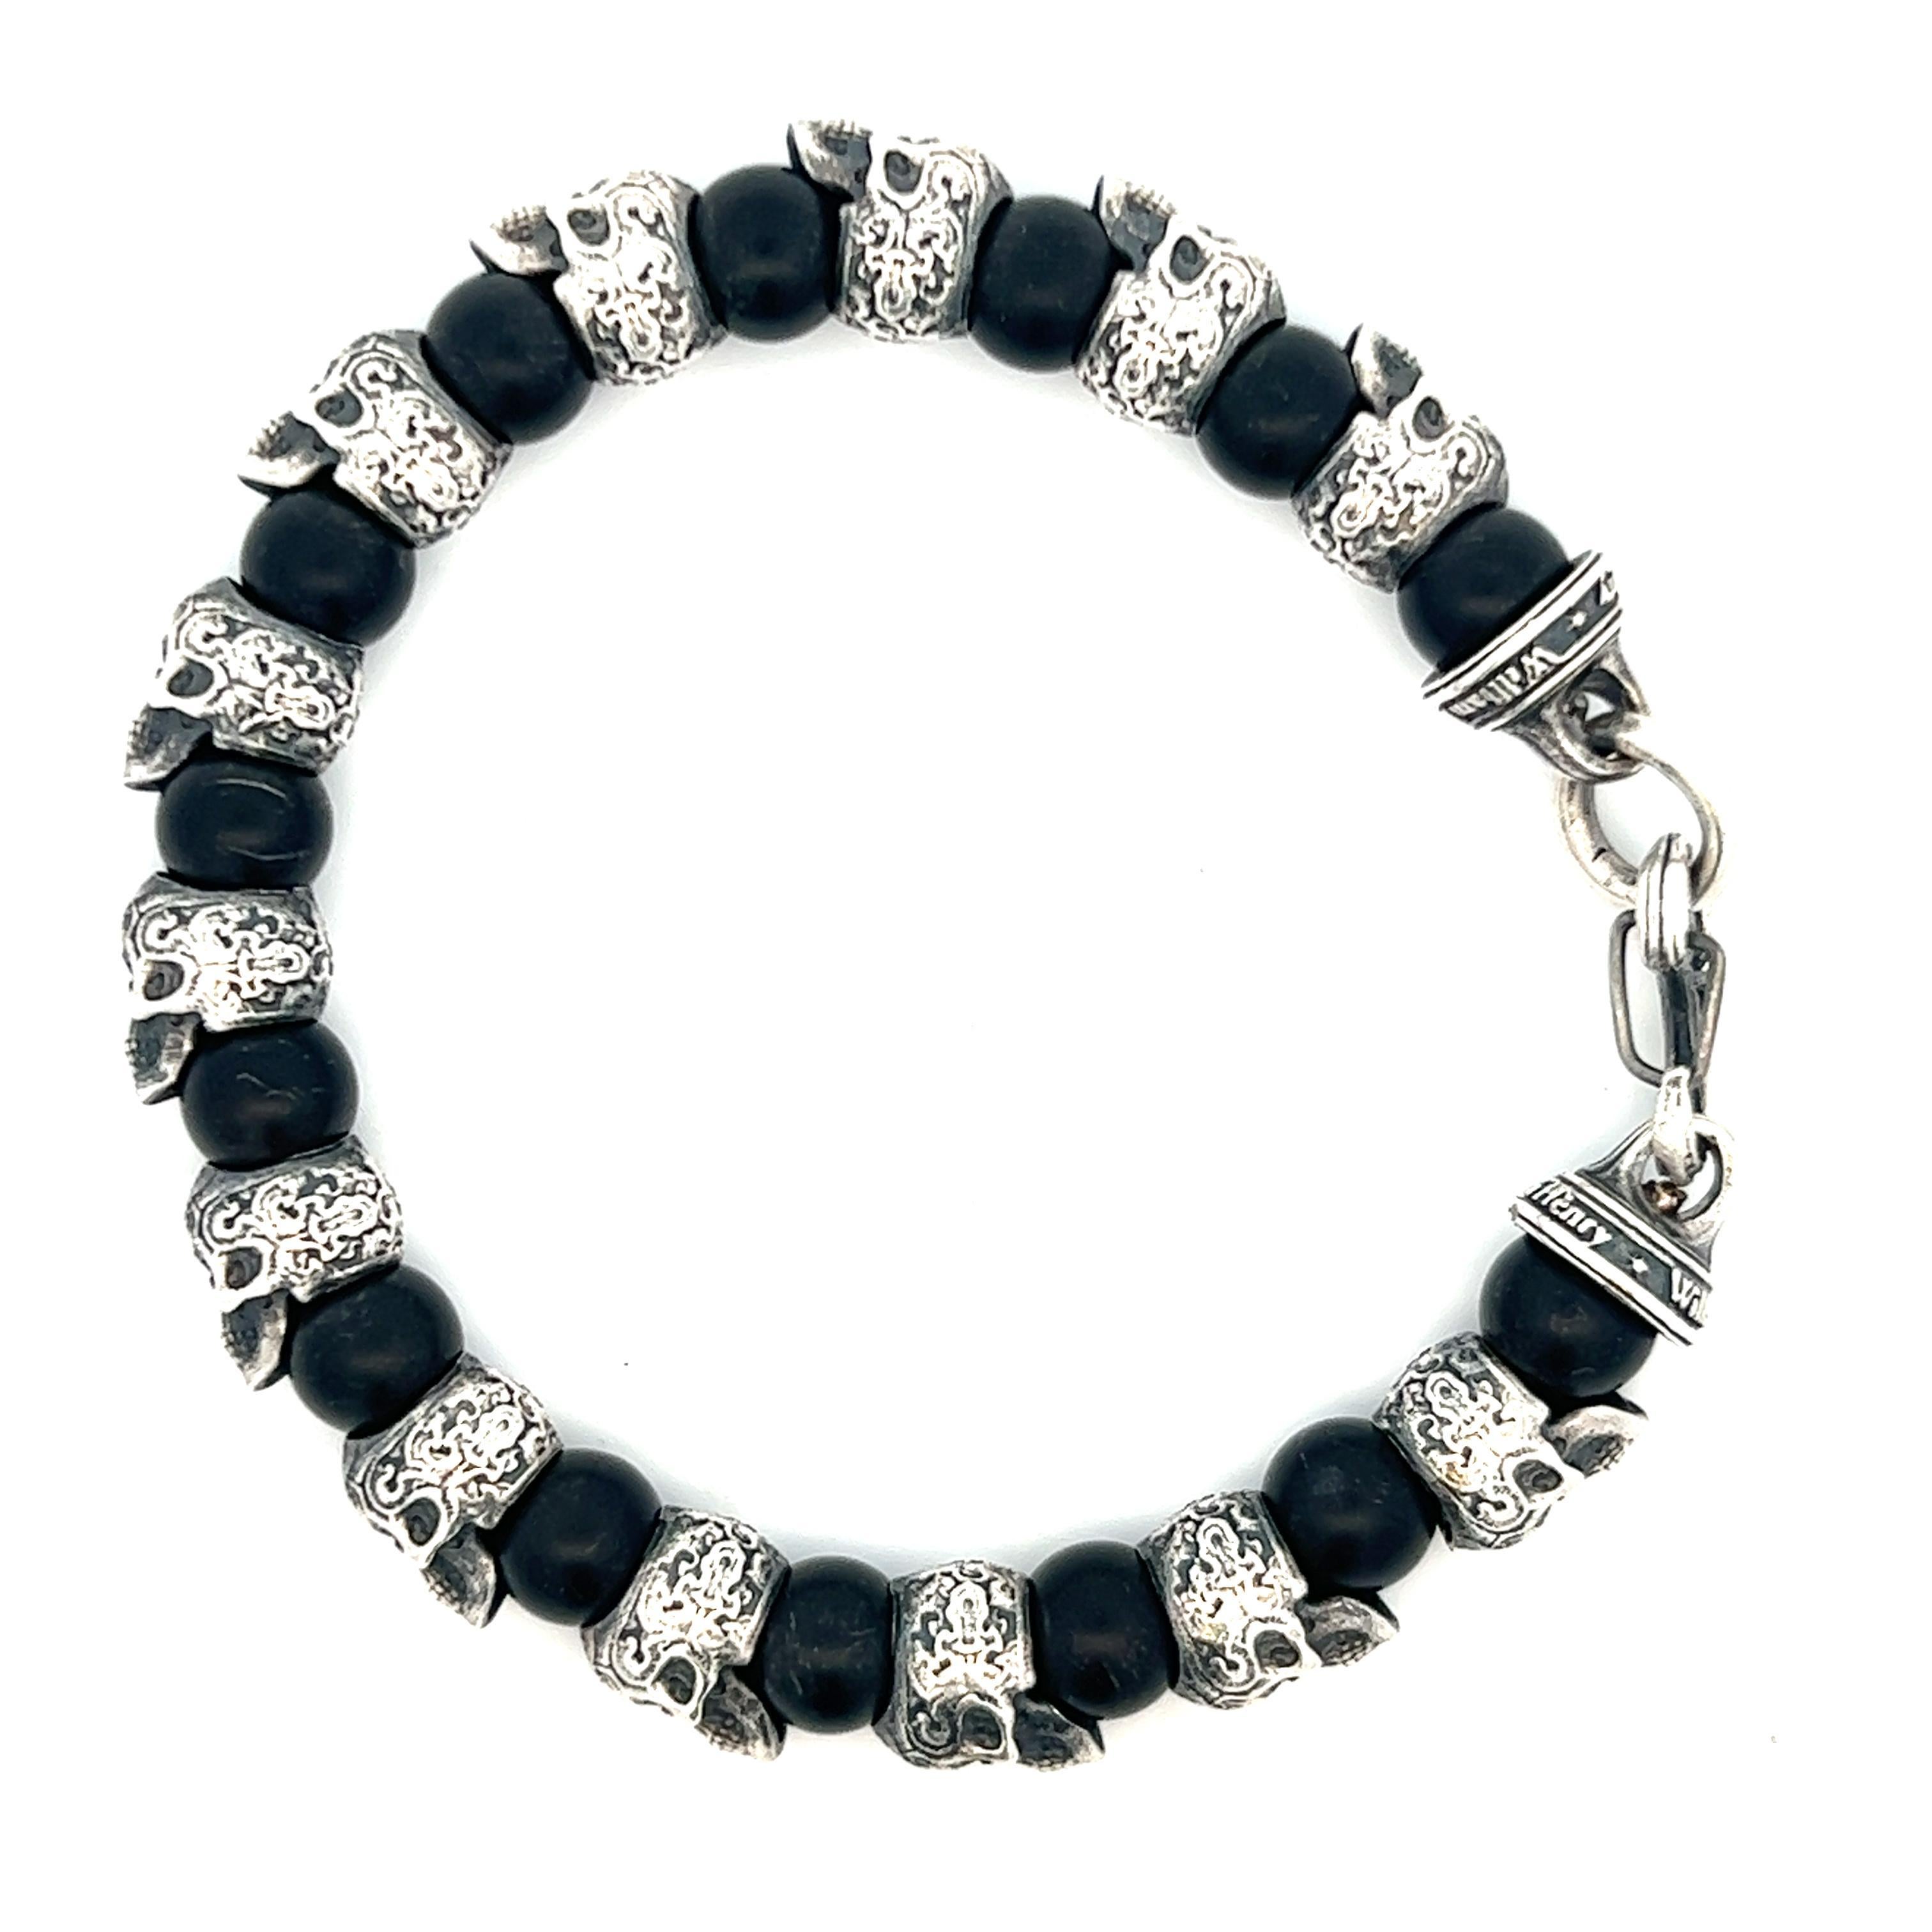 This bracelet is its own class- despite all the beaded bracelets and skulls out there, the 'Shaman' stands apart. Skull beads are sculpted in sterling silver, beautifully rendered based on the powerful 'sugar skull' tradition from Mexico. The clasp